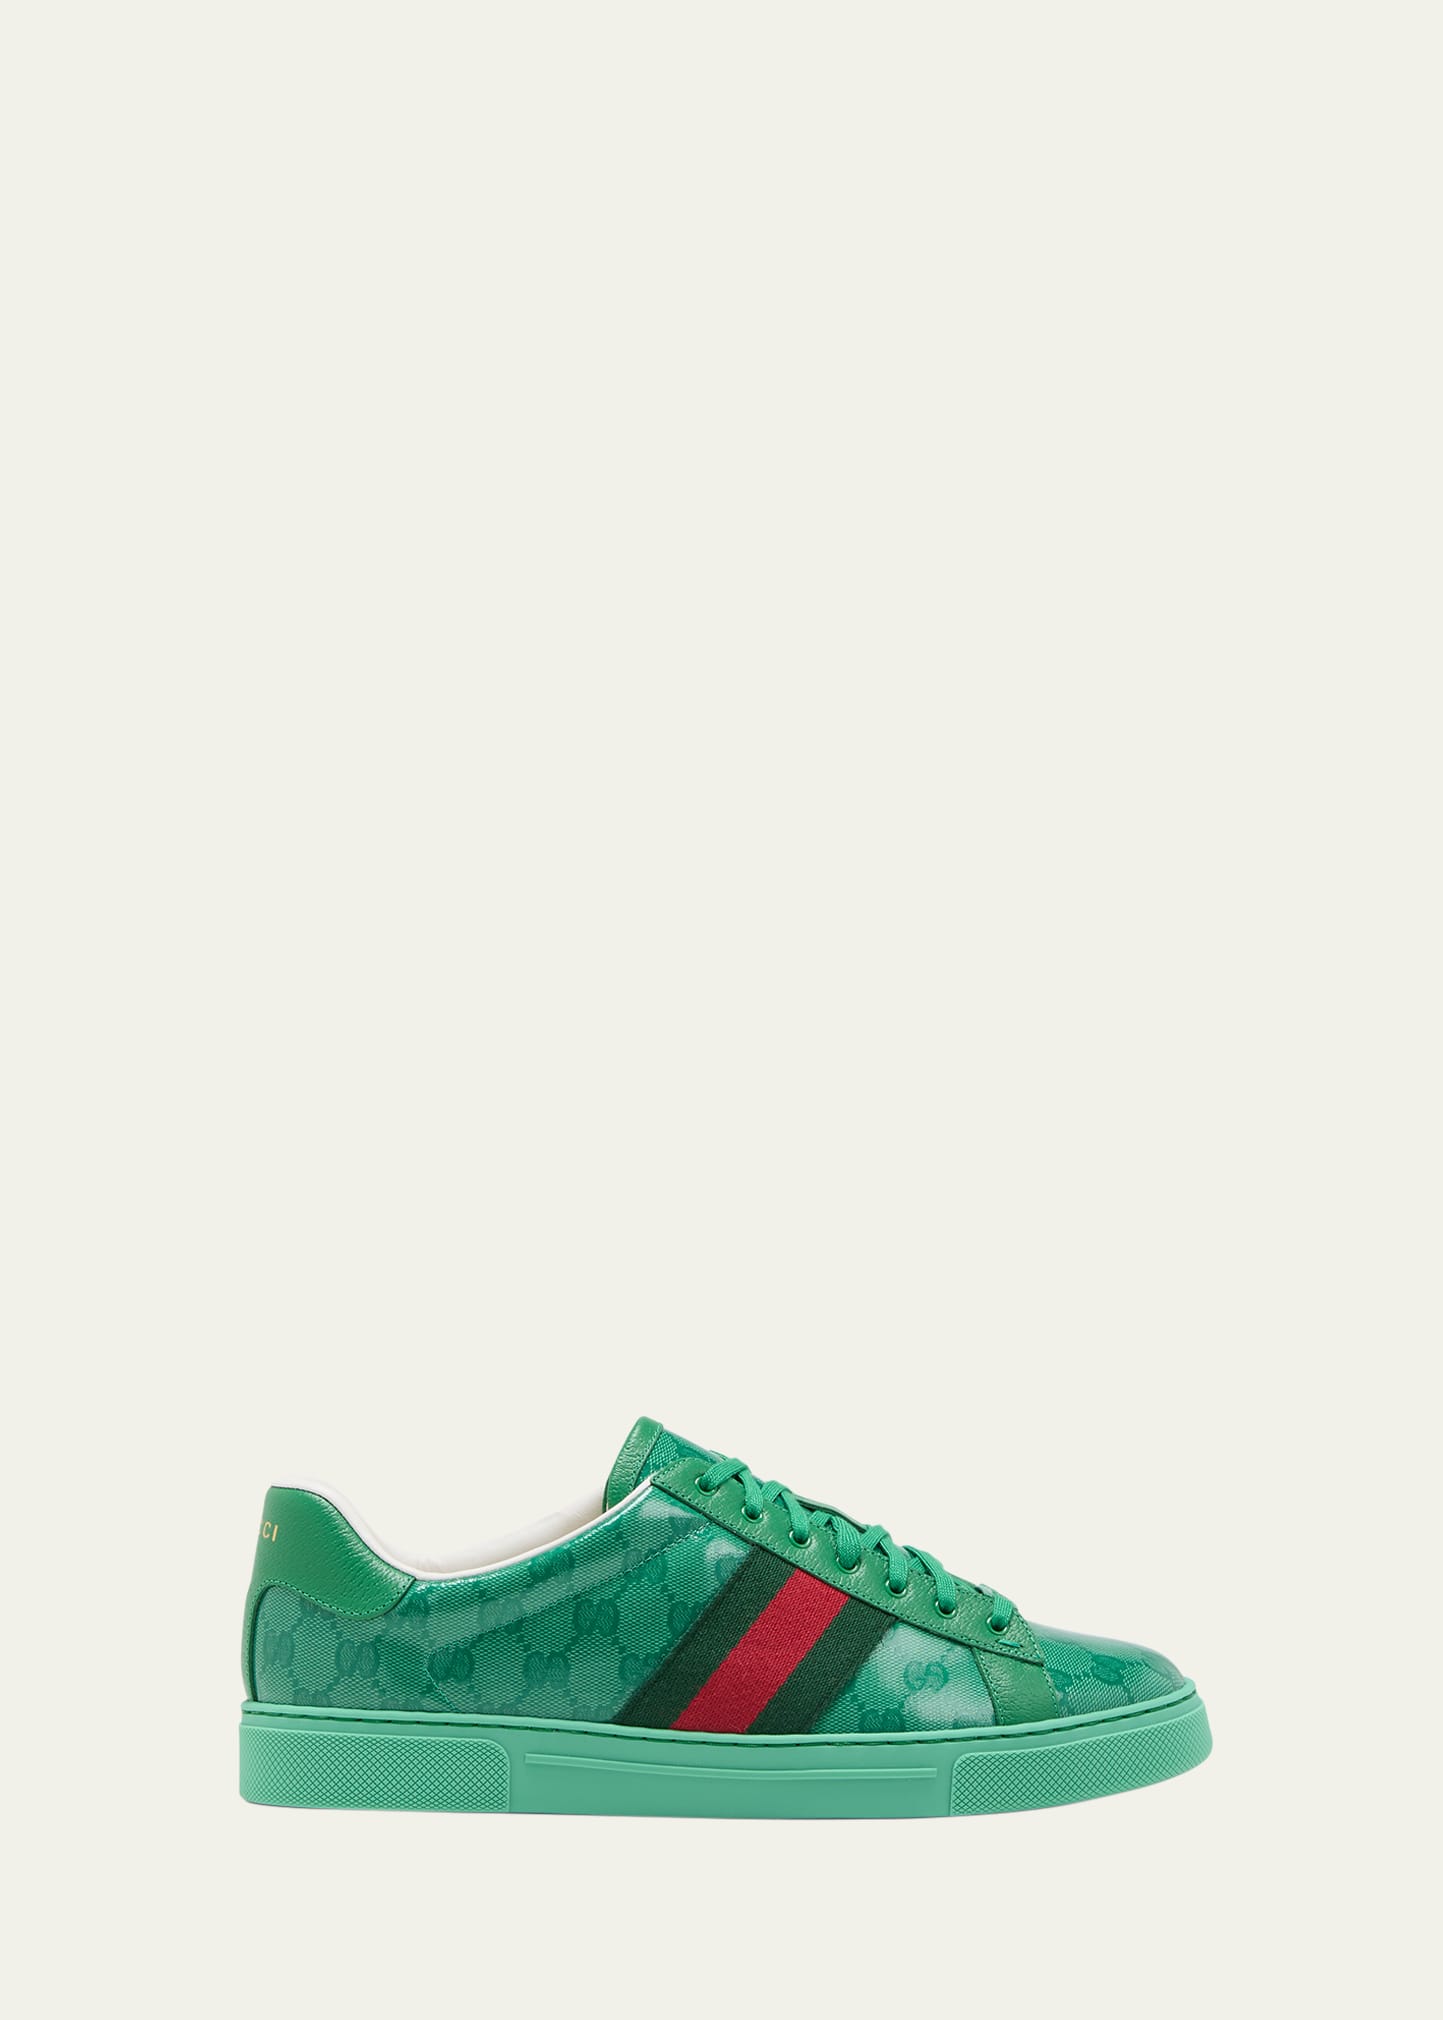 Gucci Men's Ace GG Crystal Canvas Sneaker, Red, GG Canvas